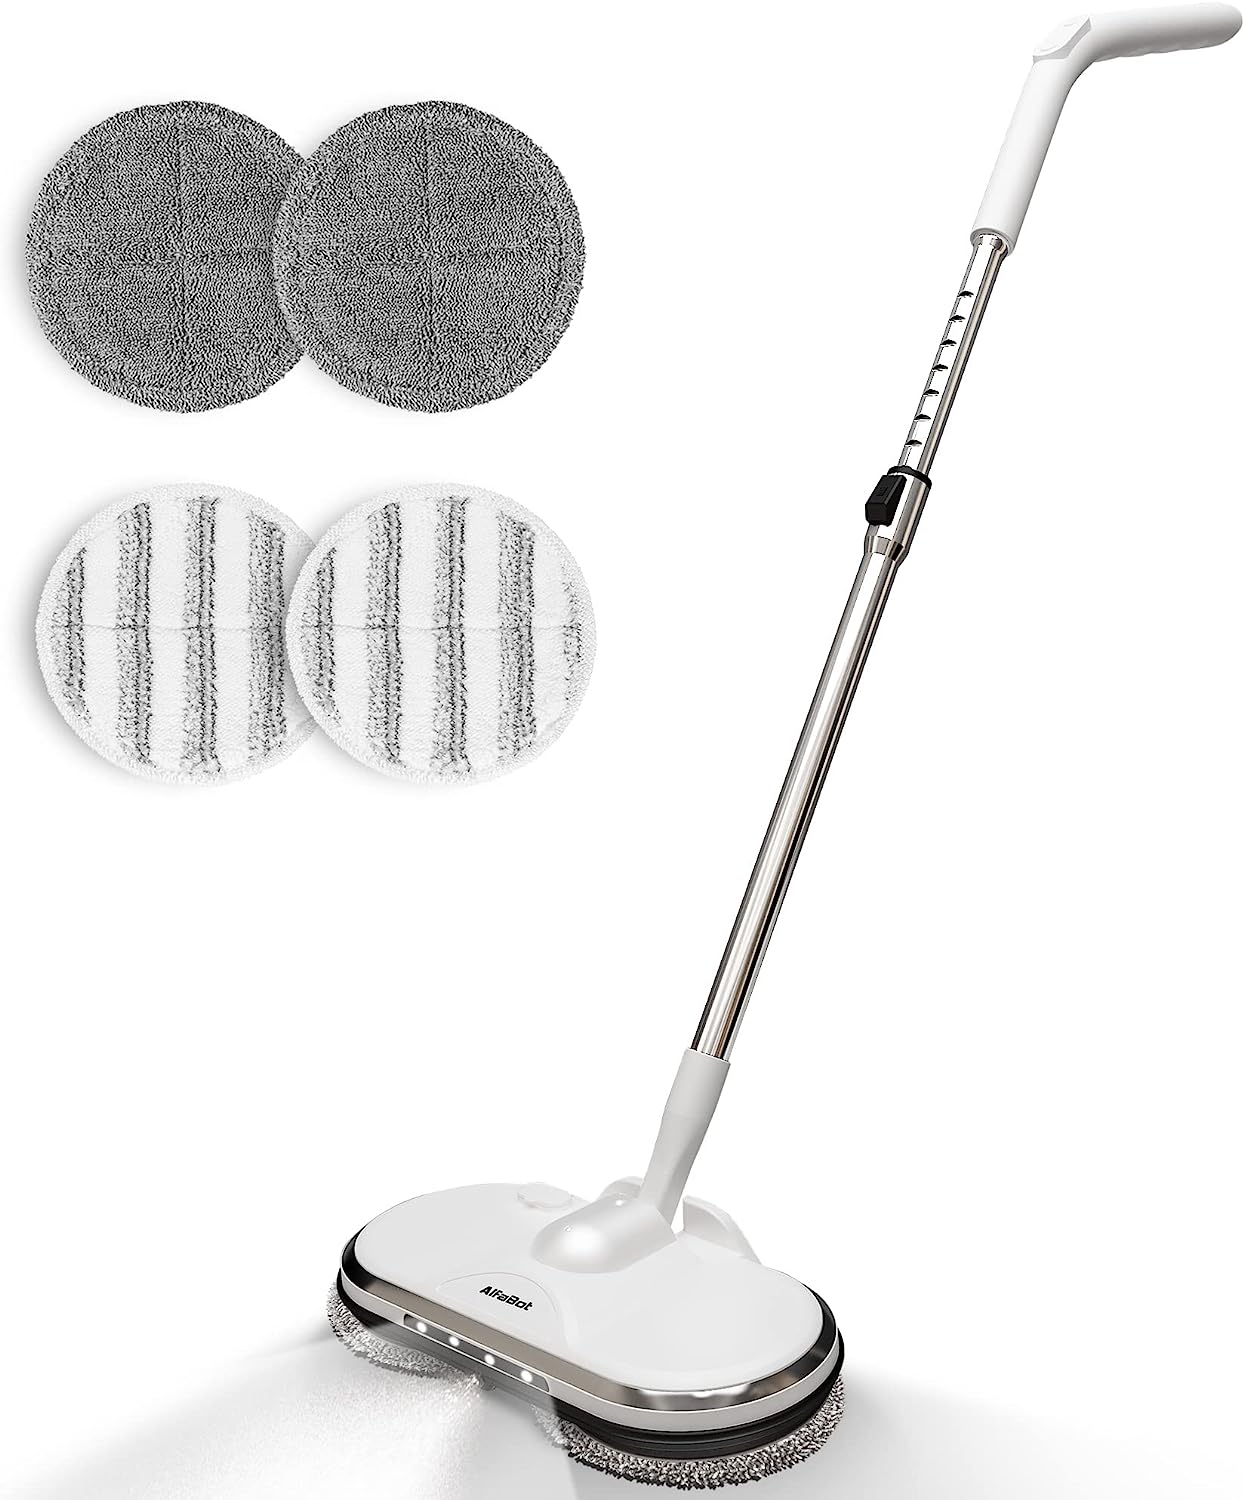 POWERFULL Cordless Electric Mop for Floor Cleaning, AlfaBot WS-24 Electric Spin Mop, Electric Mop with Water Sprayer and LED Headlight, Lightweight & Rechargeable Floor Scrubber for Hardwood Tile & Laminate Floors